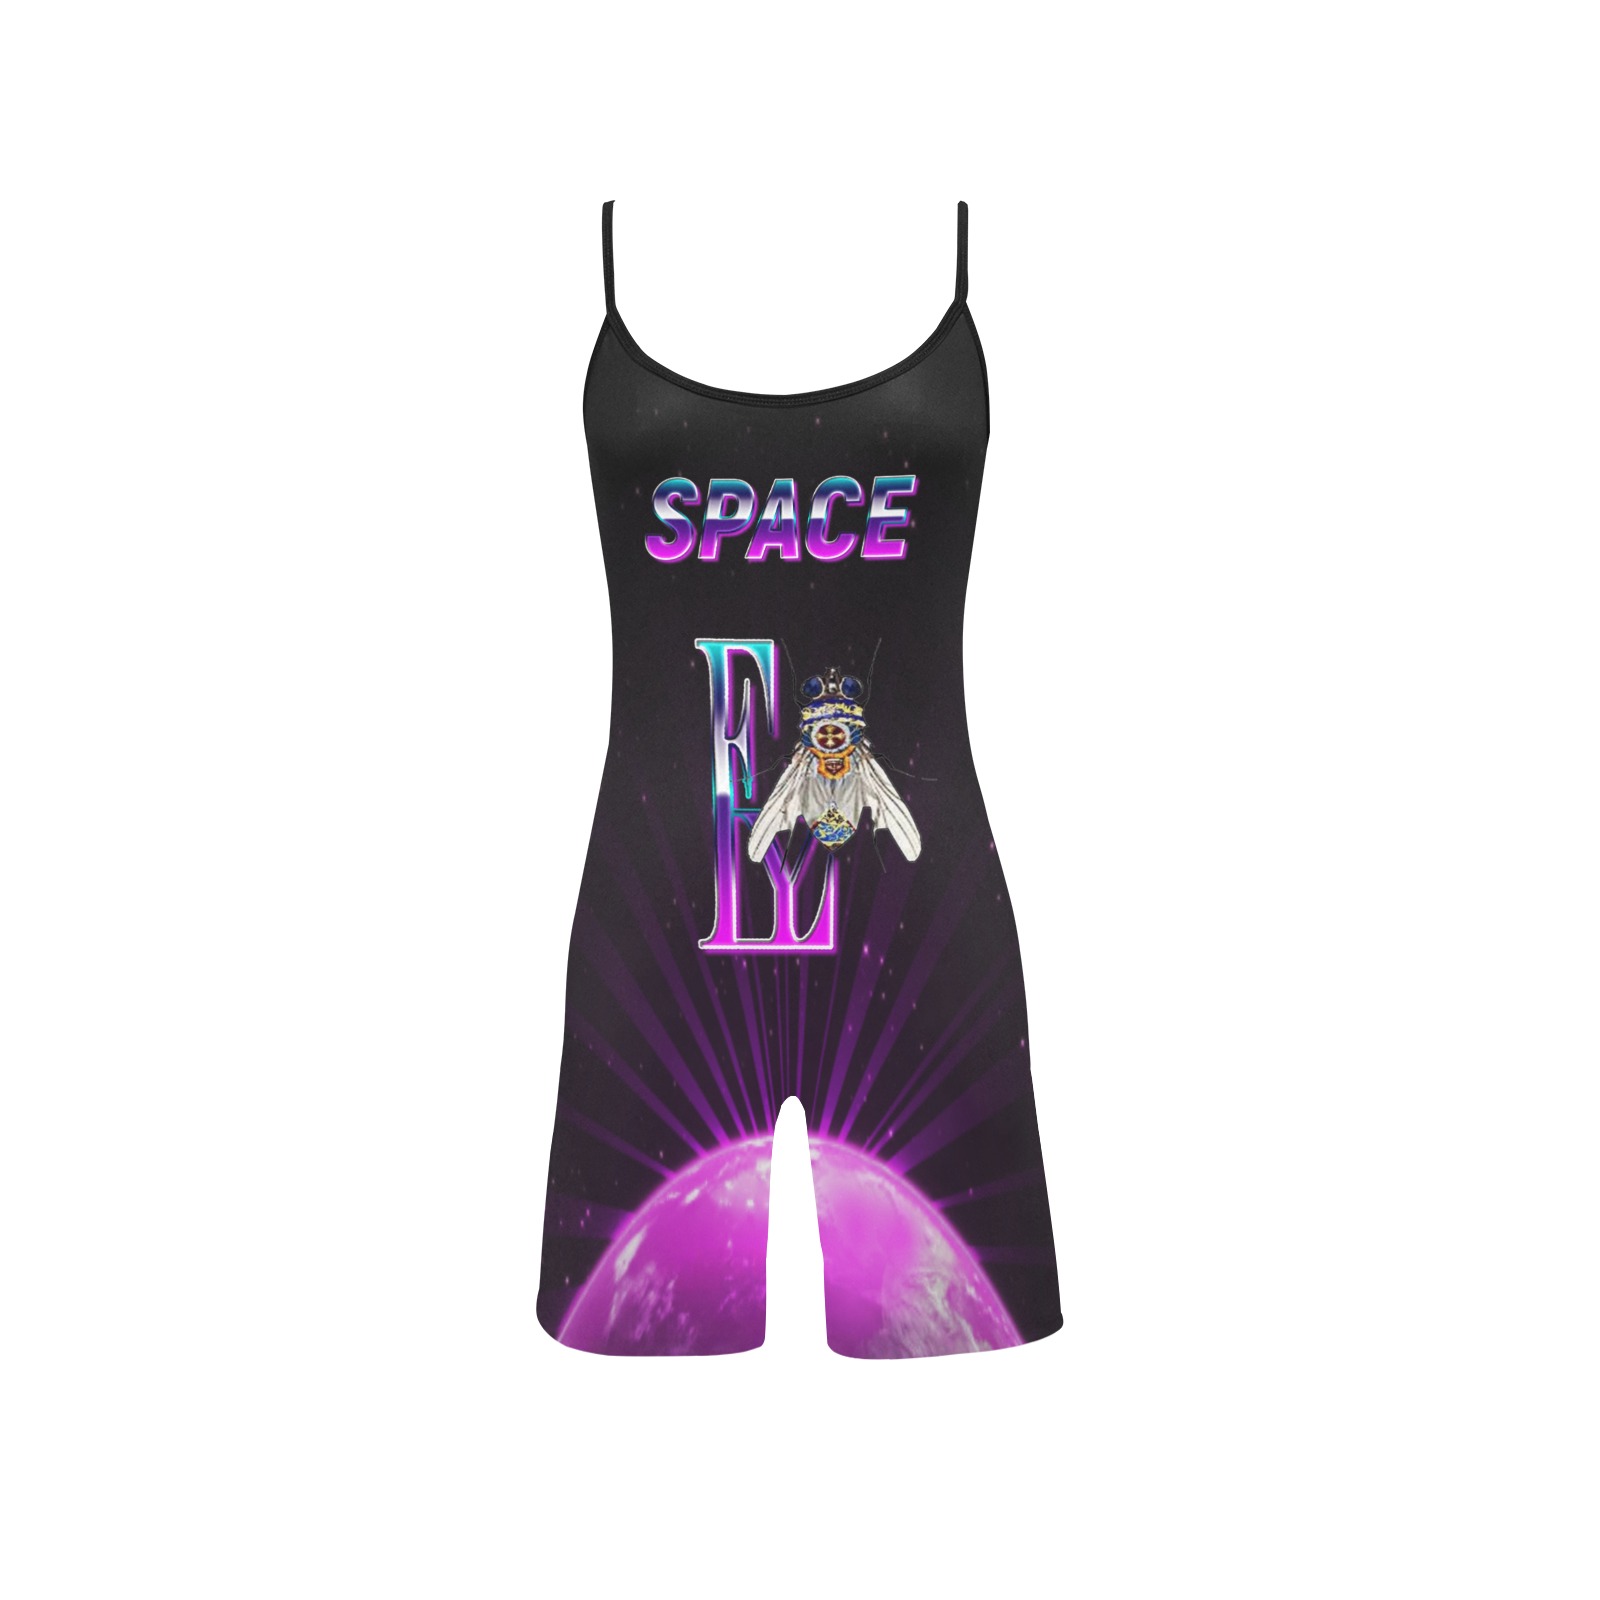 Space Collectable Fly Women's Short Yoga Bodysuit